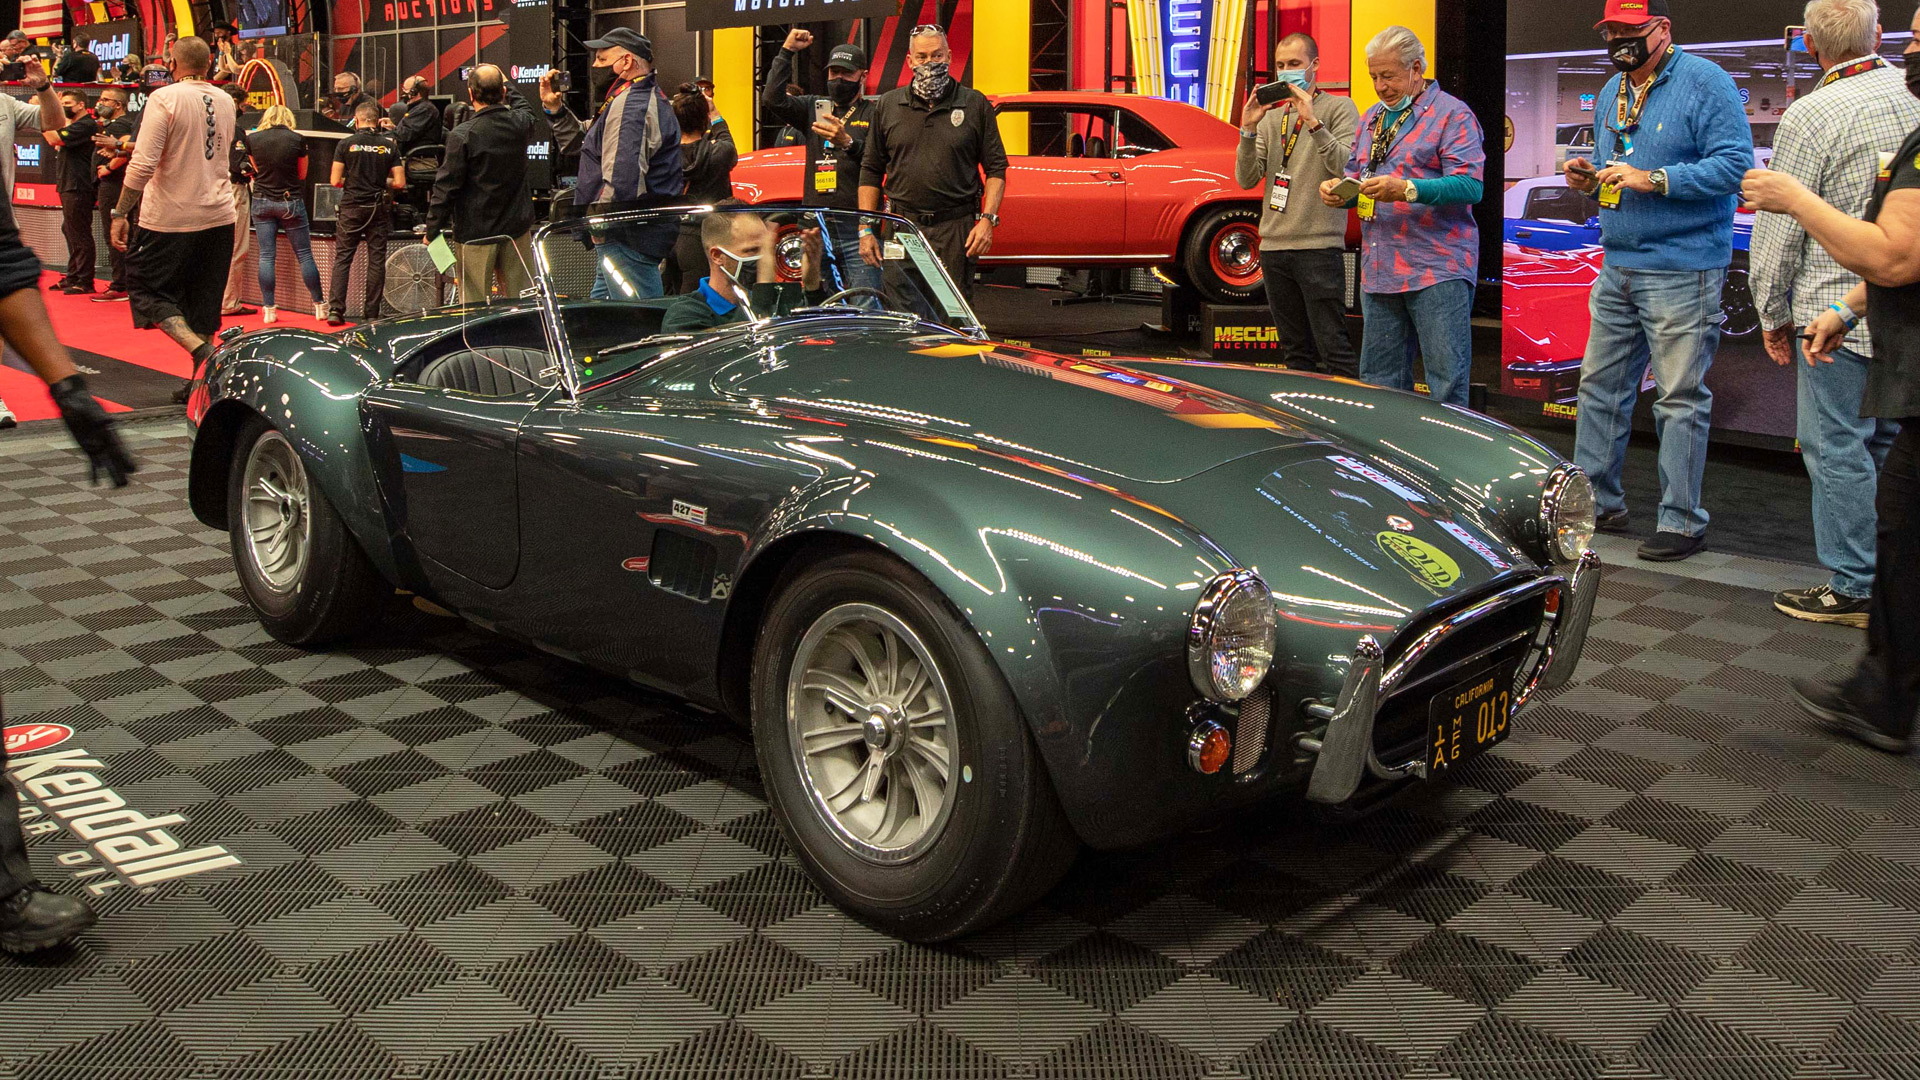 Sale of 1965 Shelby 427 Cobra owned by Carroll Shelby - Photo Credit: Mecum Auctions